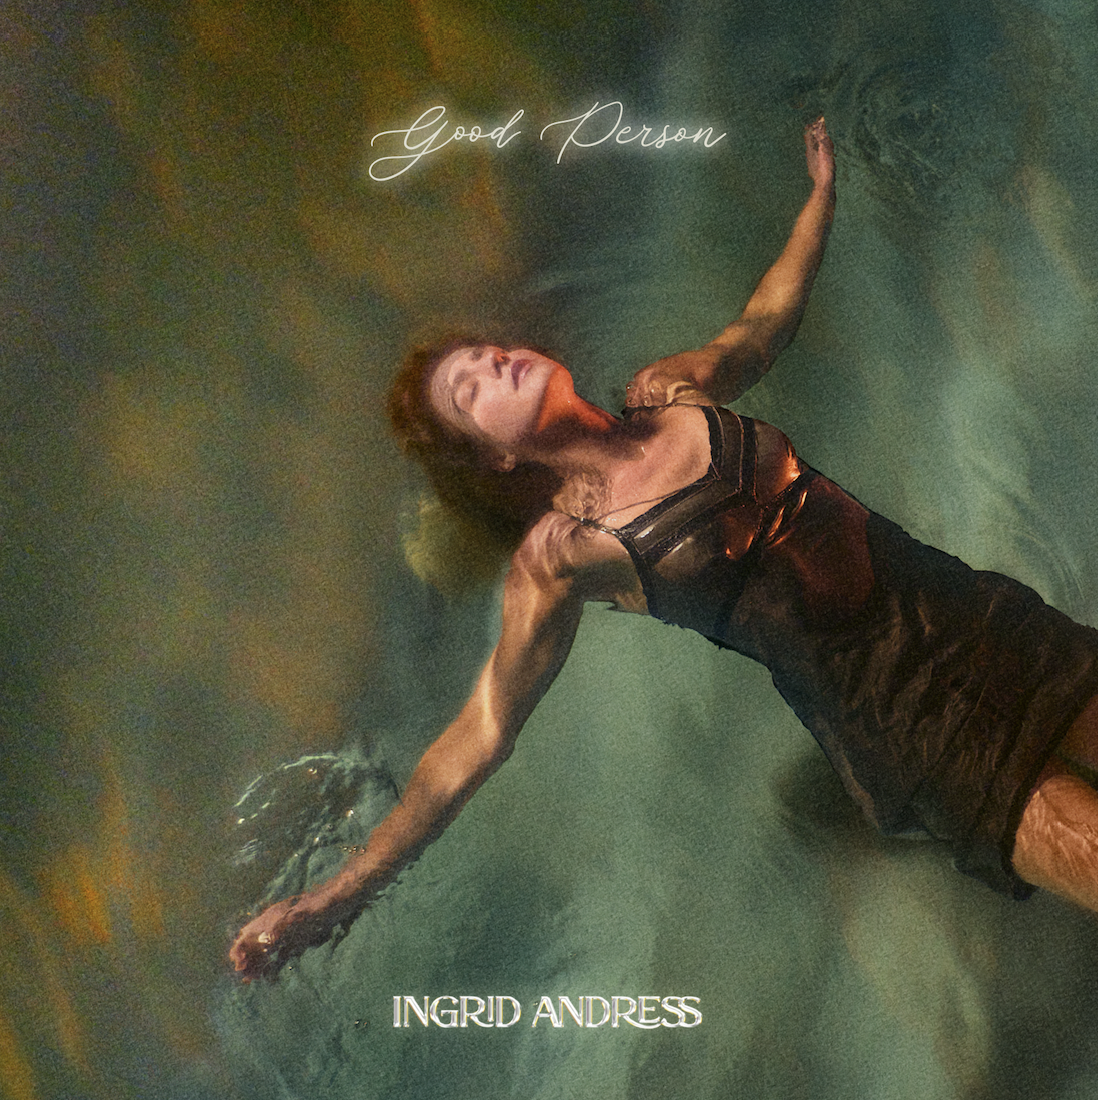 INGRID ANDRESS SHARES NEW ALBUM GOOD PERSON TODAY